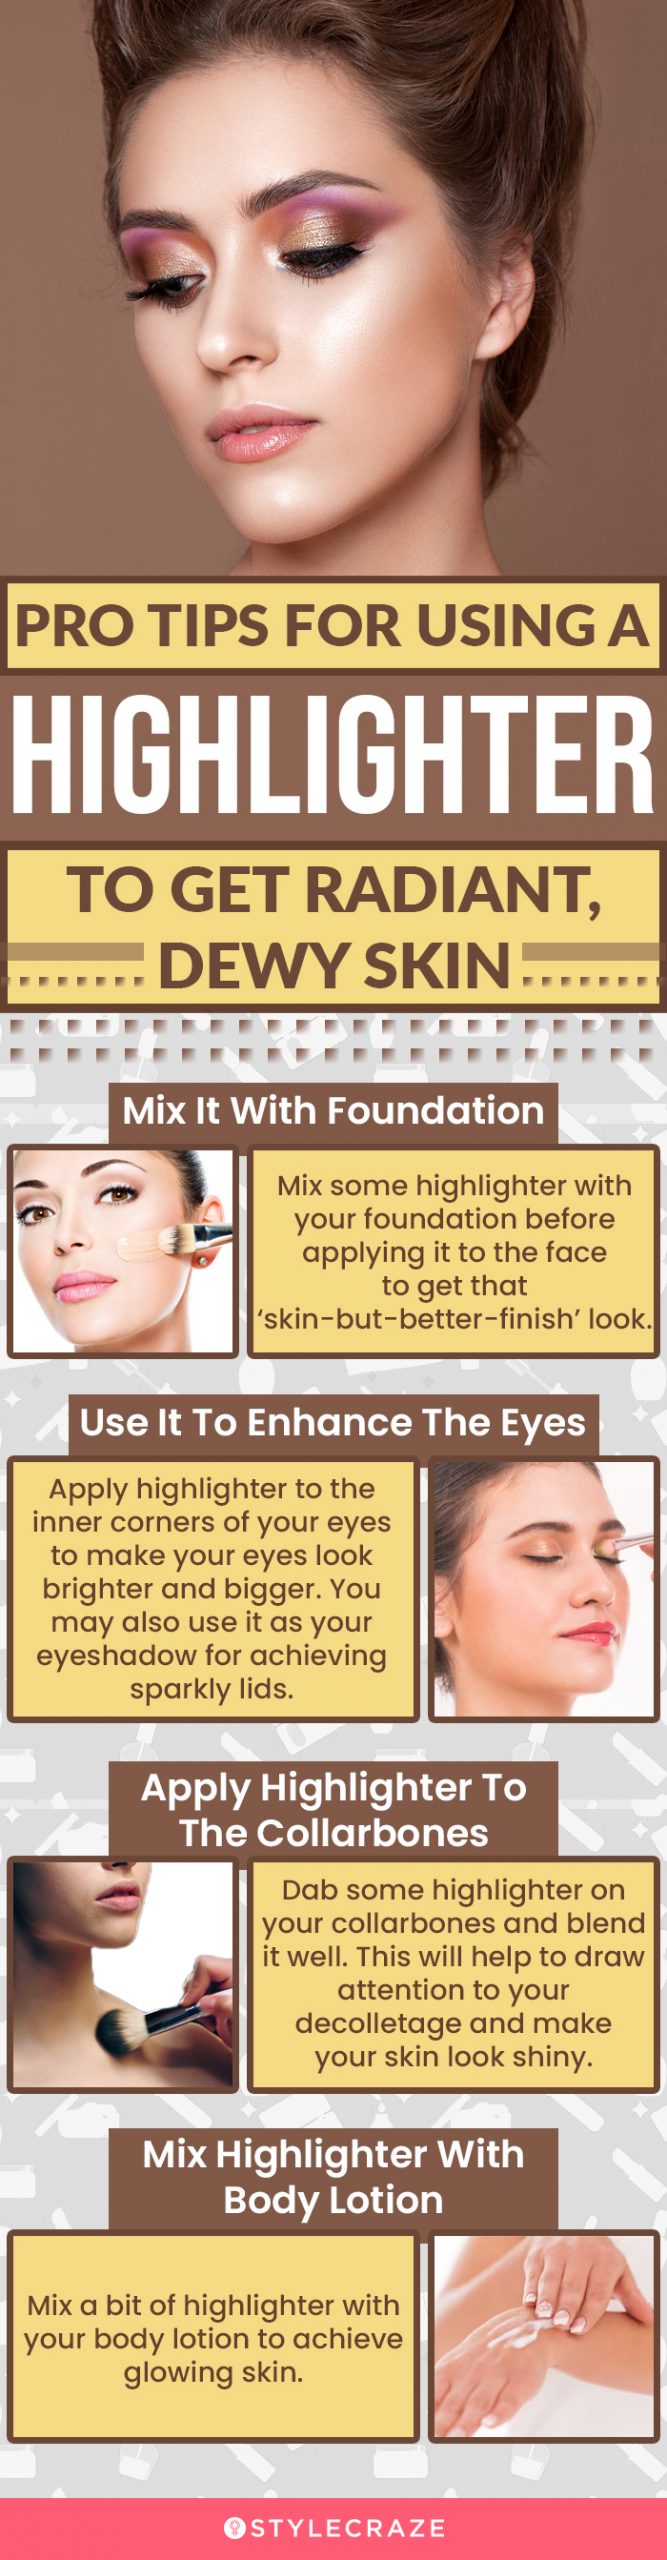 Pro Tips For Using Highlighter To Get Radiant, Dewy Skin (infographic)